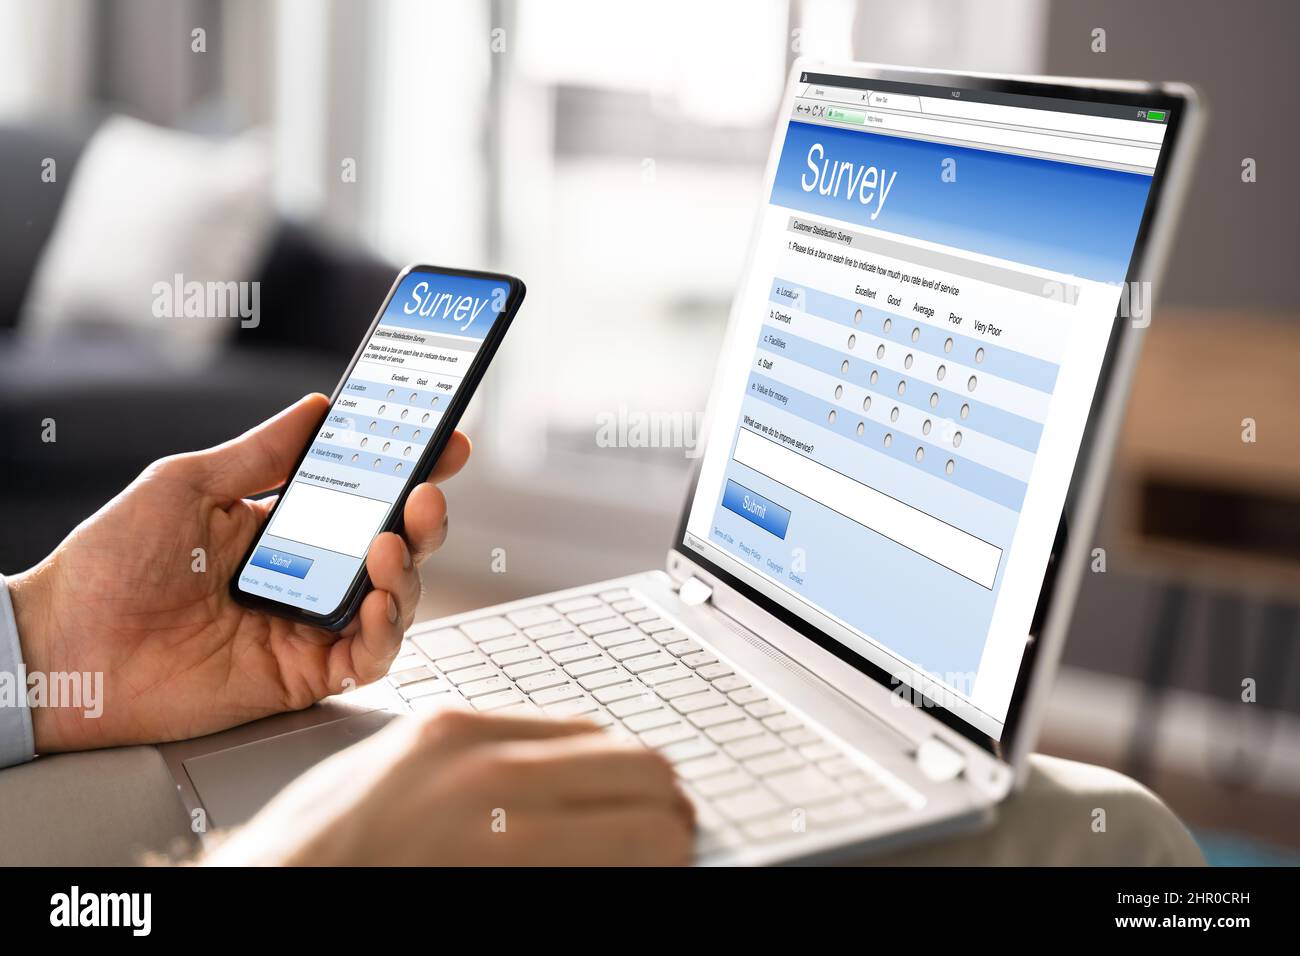 Digital Online Research Survey Form On Mobile Phone Screen Stock Photo